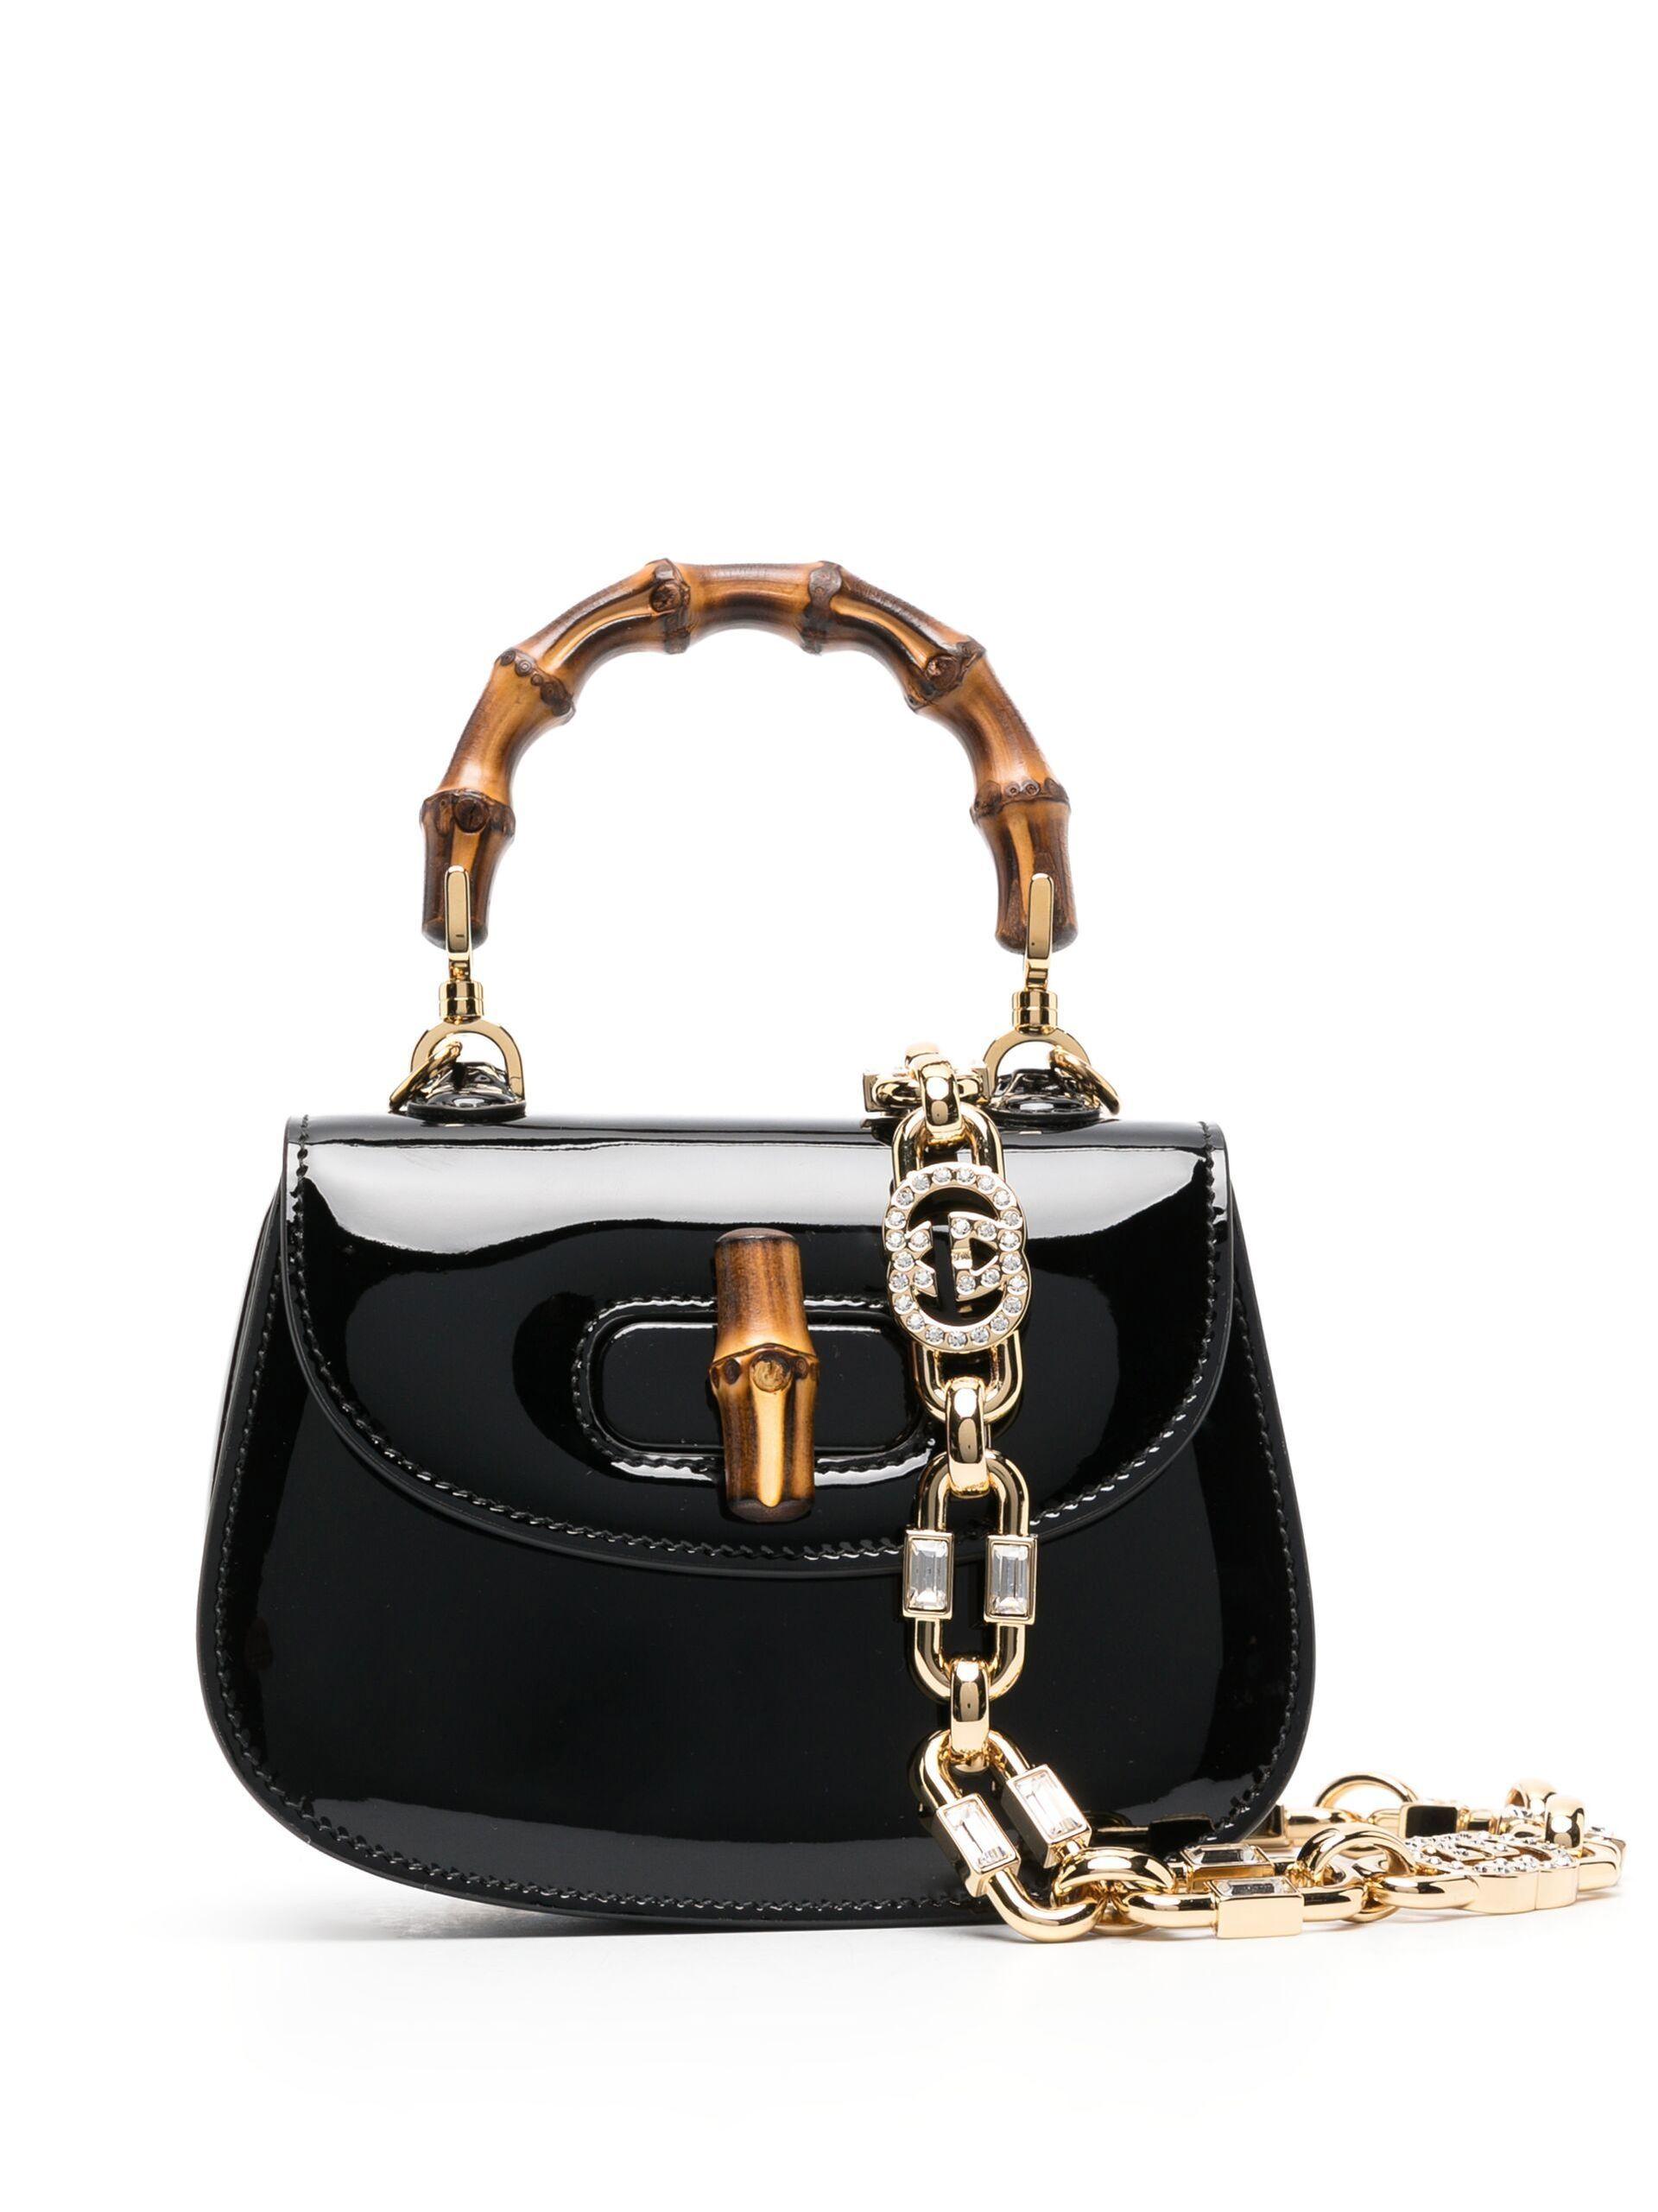 Gucci Bamboo 1947 mini top handle bag in black patent leather